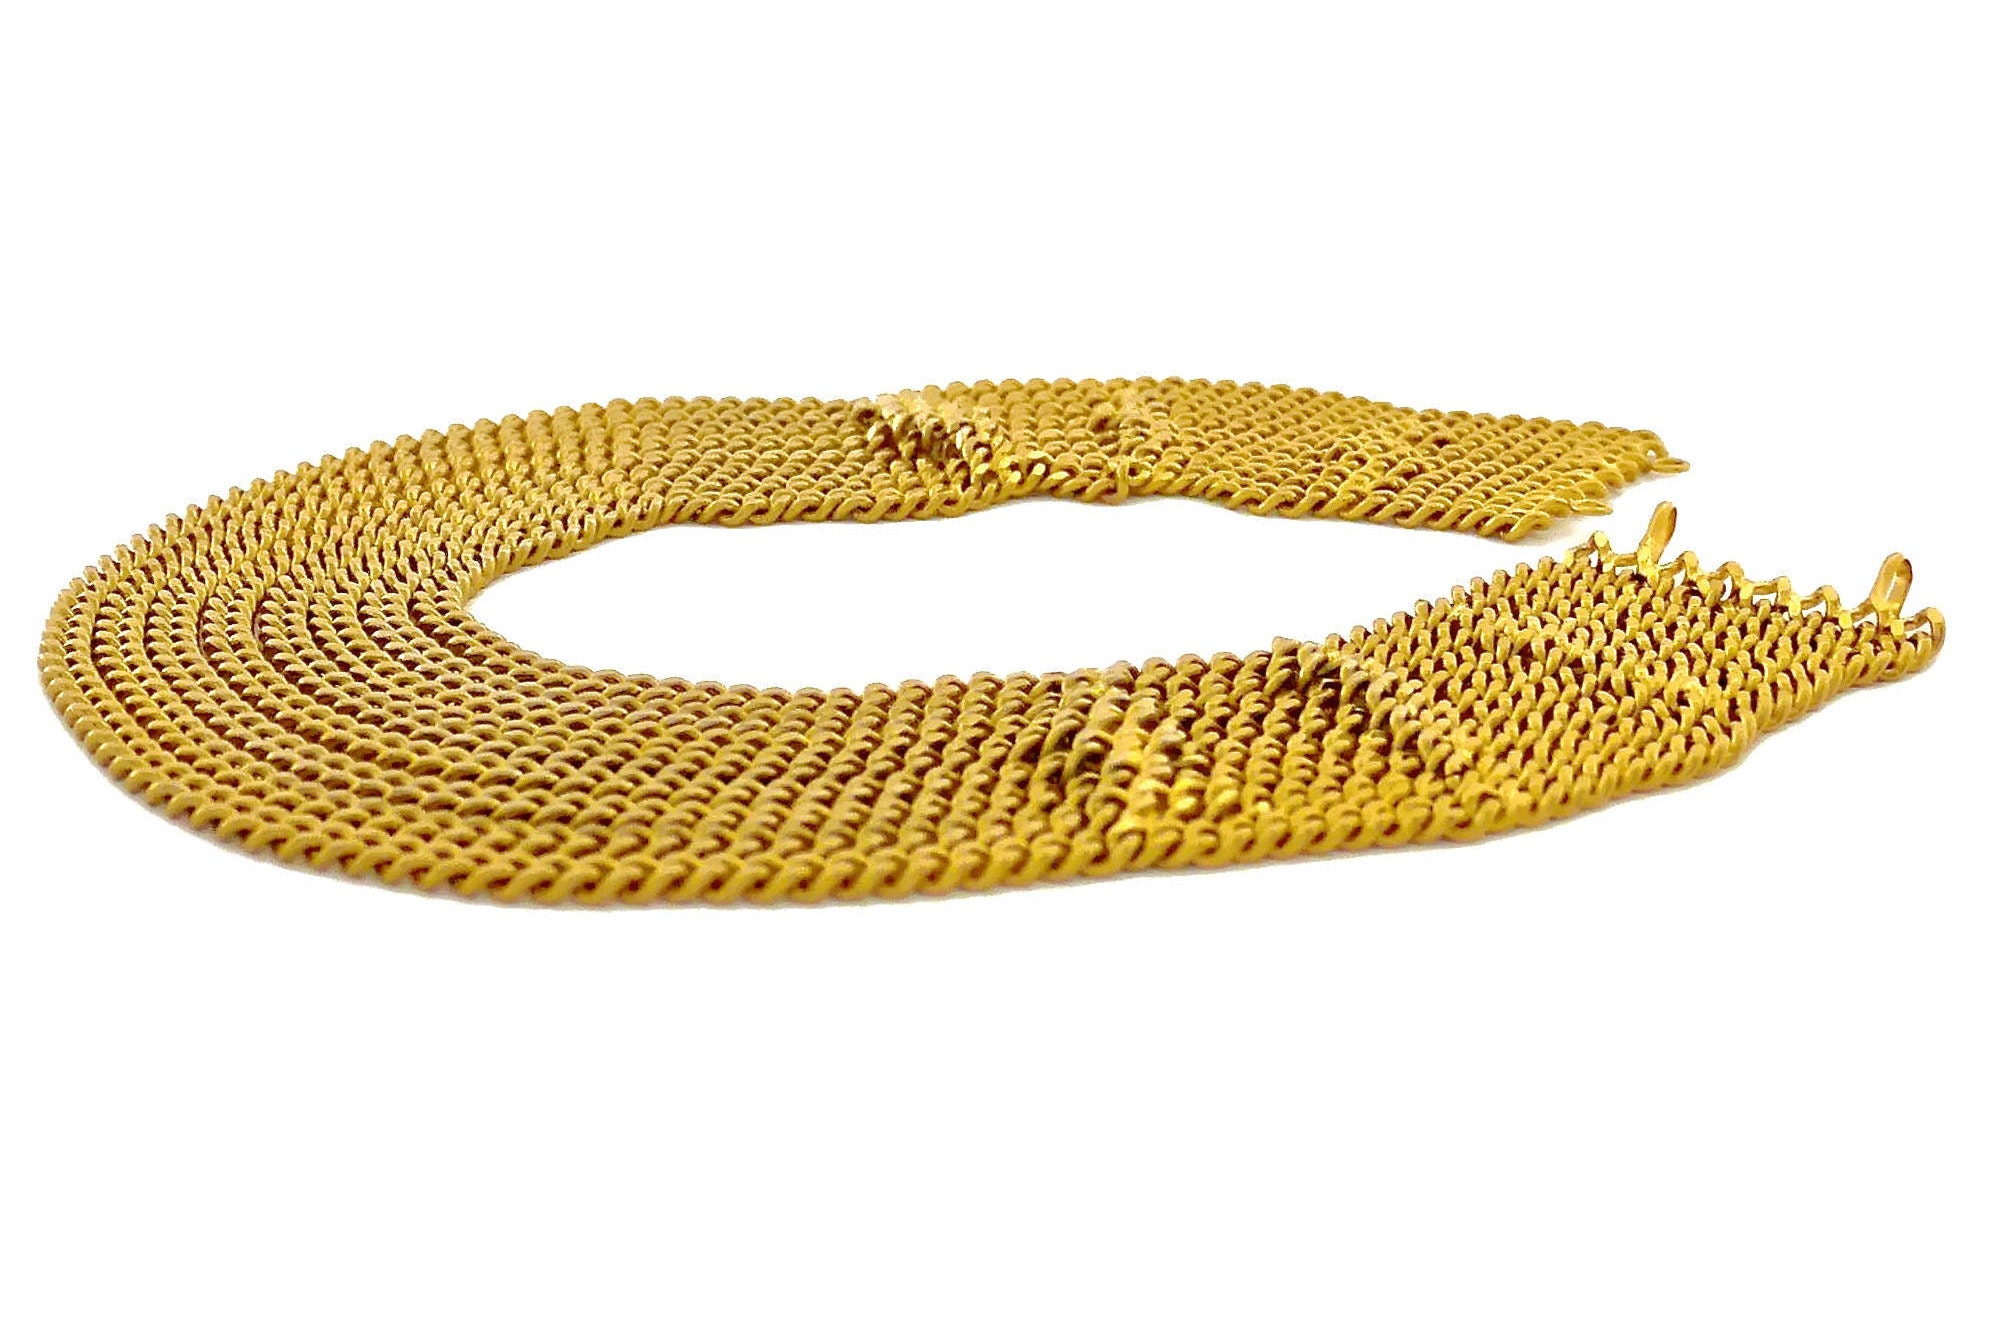 Vintage CHANEL Multi Strand Chain Necklace 